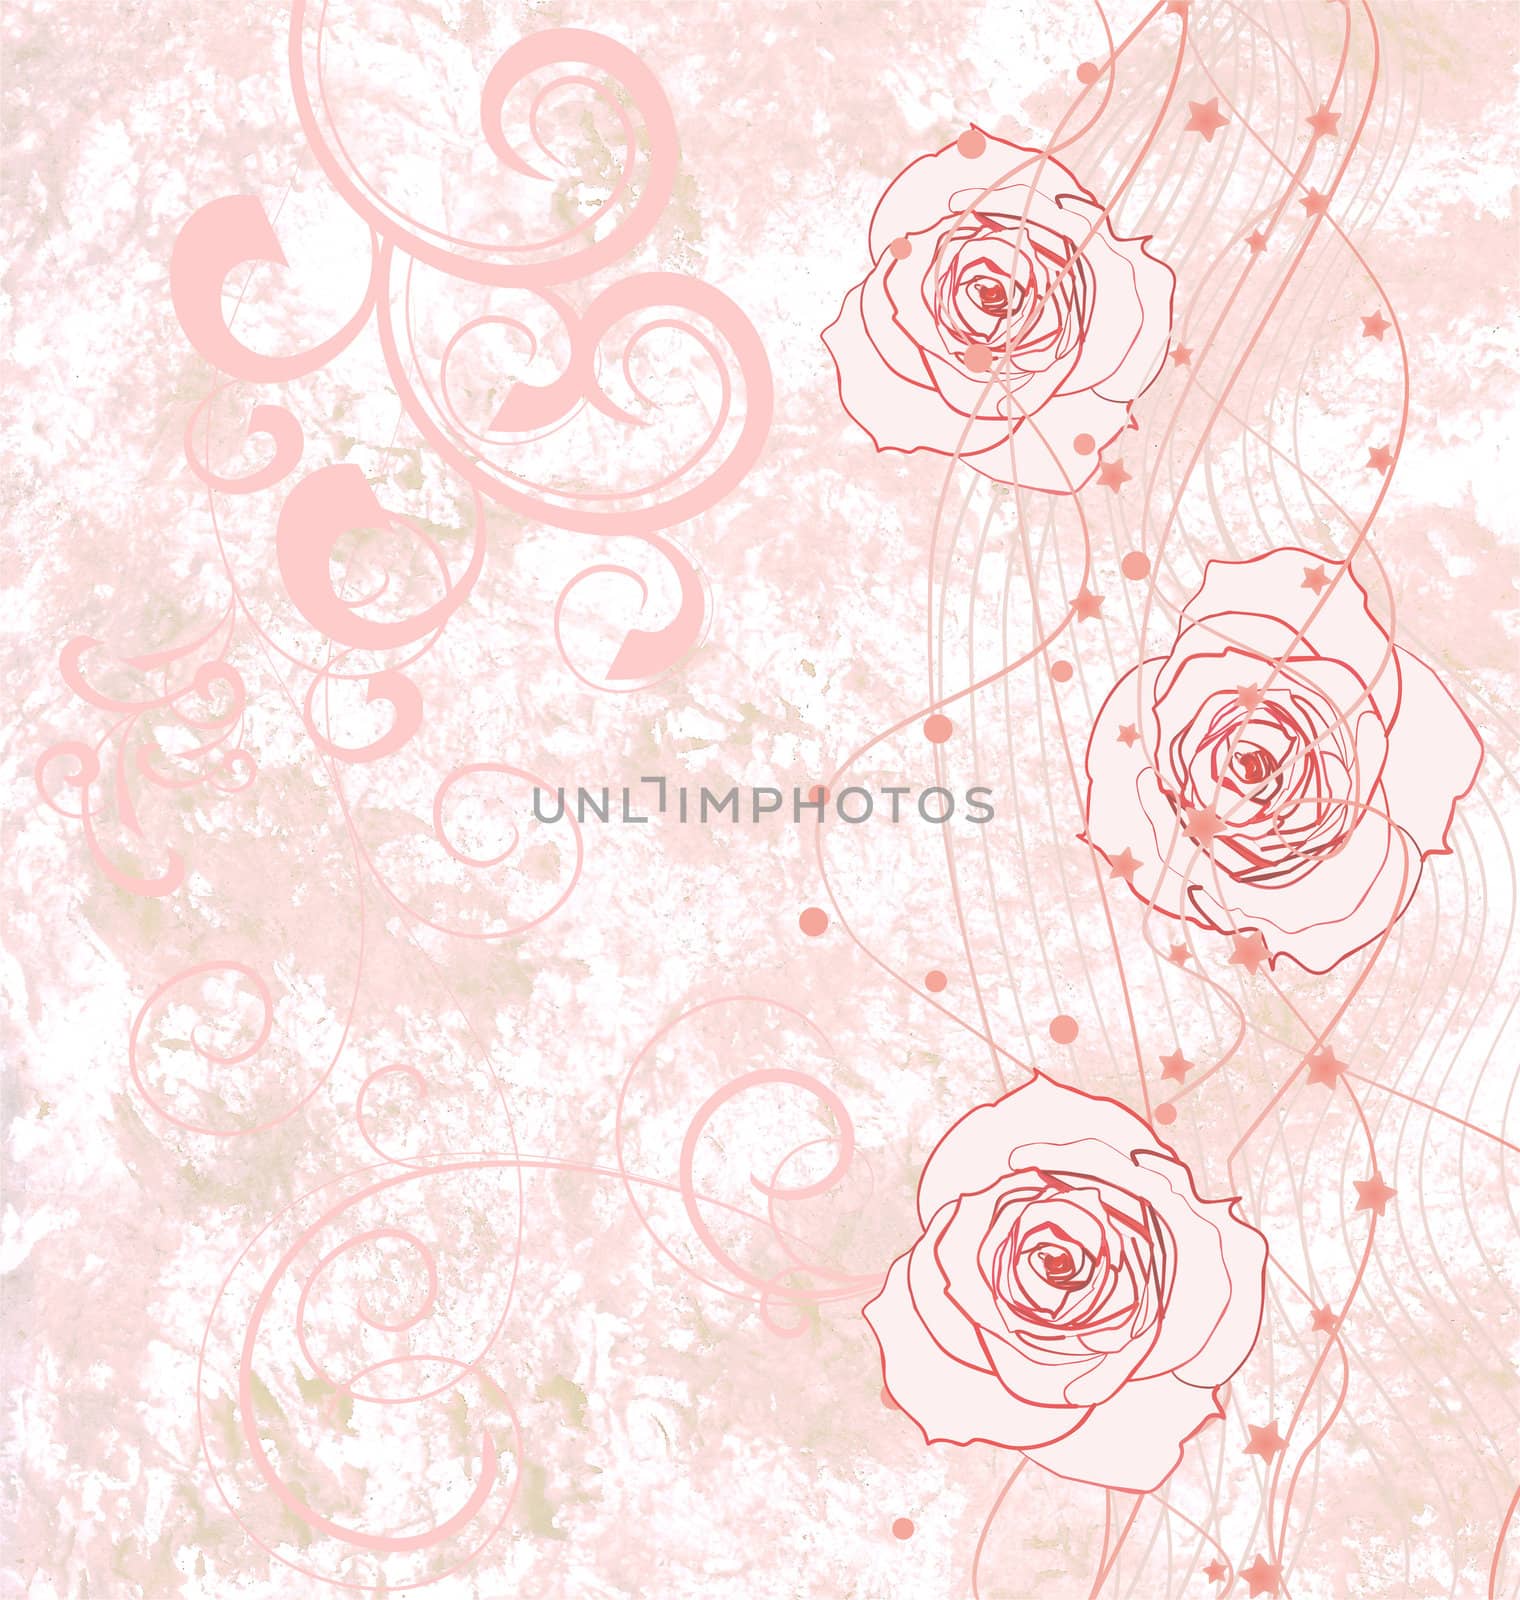 pink roses grunge illustration with flourishes for wedding or birthday